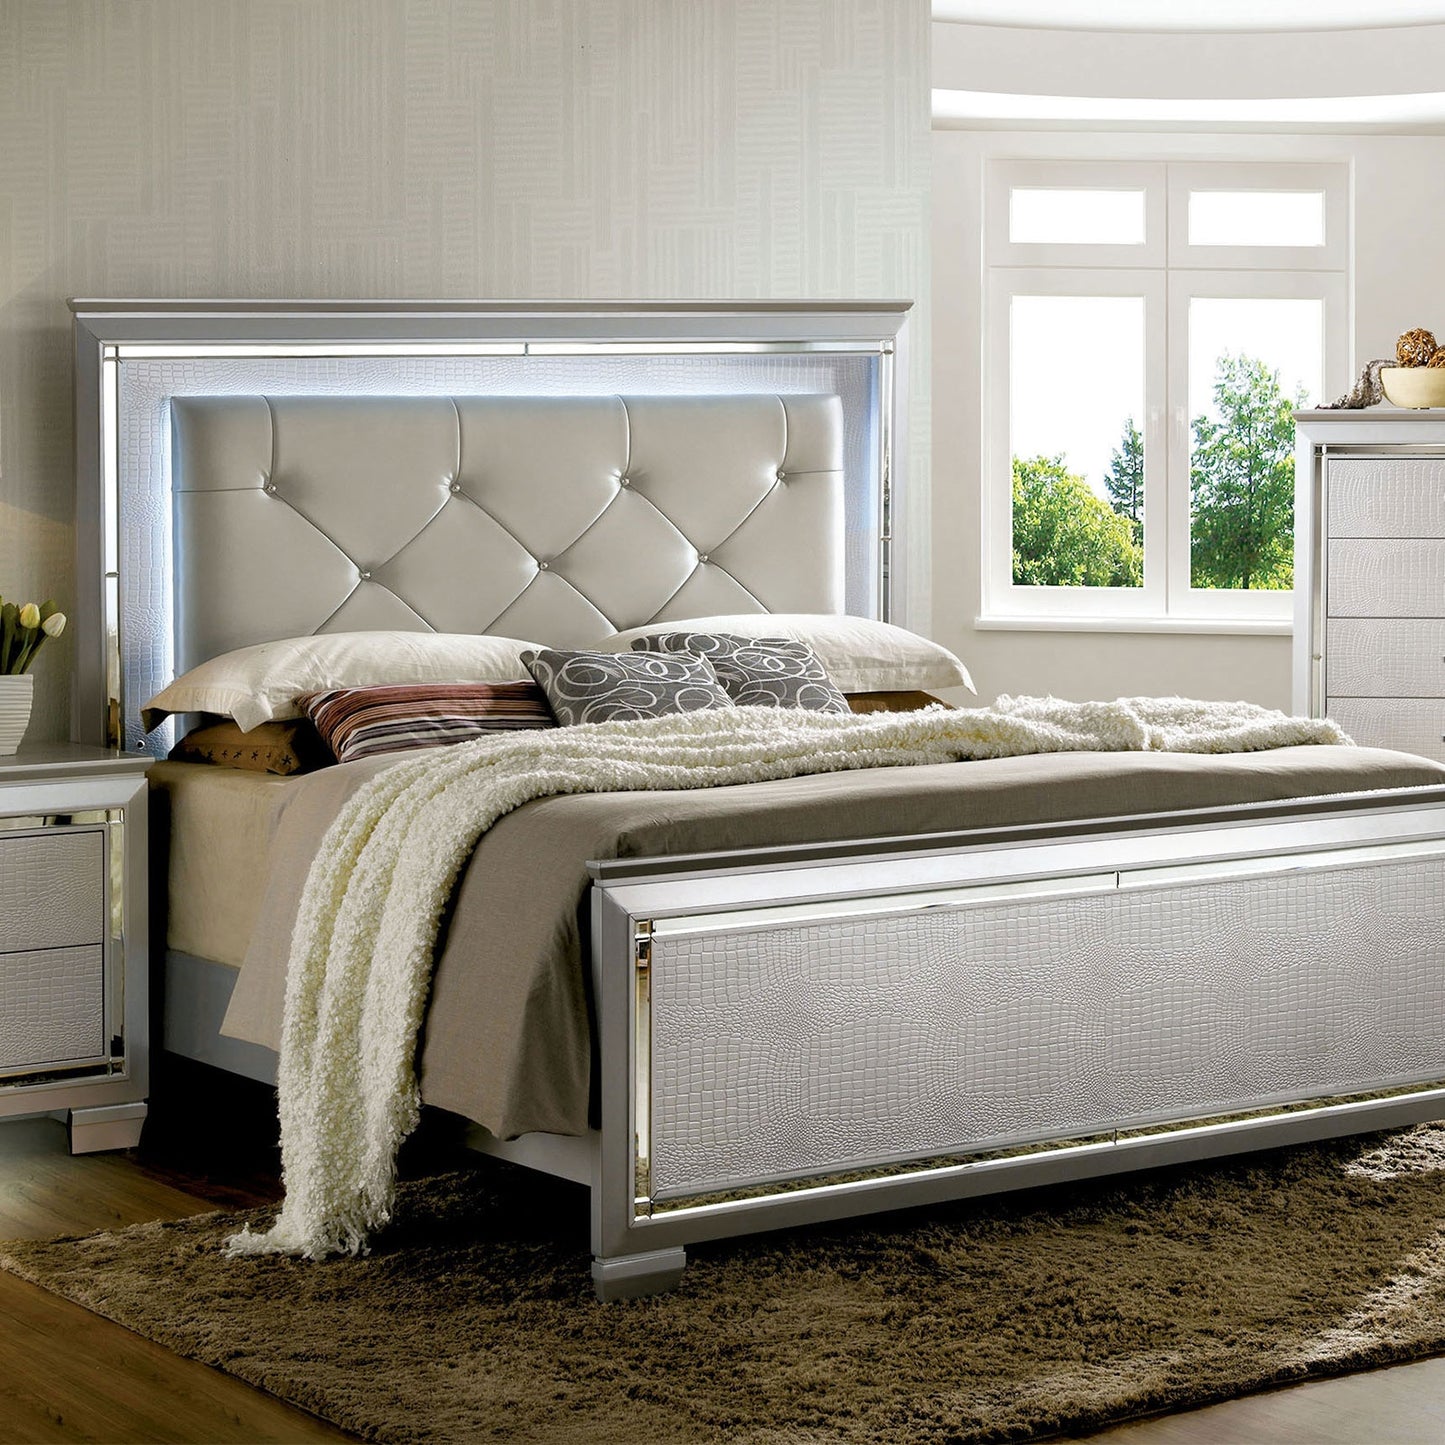 Bellanova Silver Tufted Queen Bed w- LED Lighting